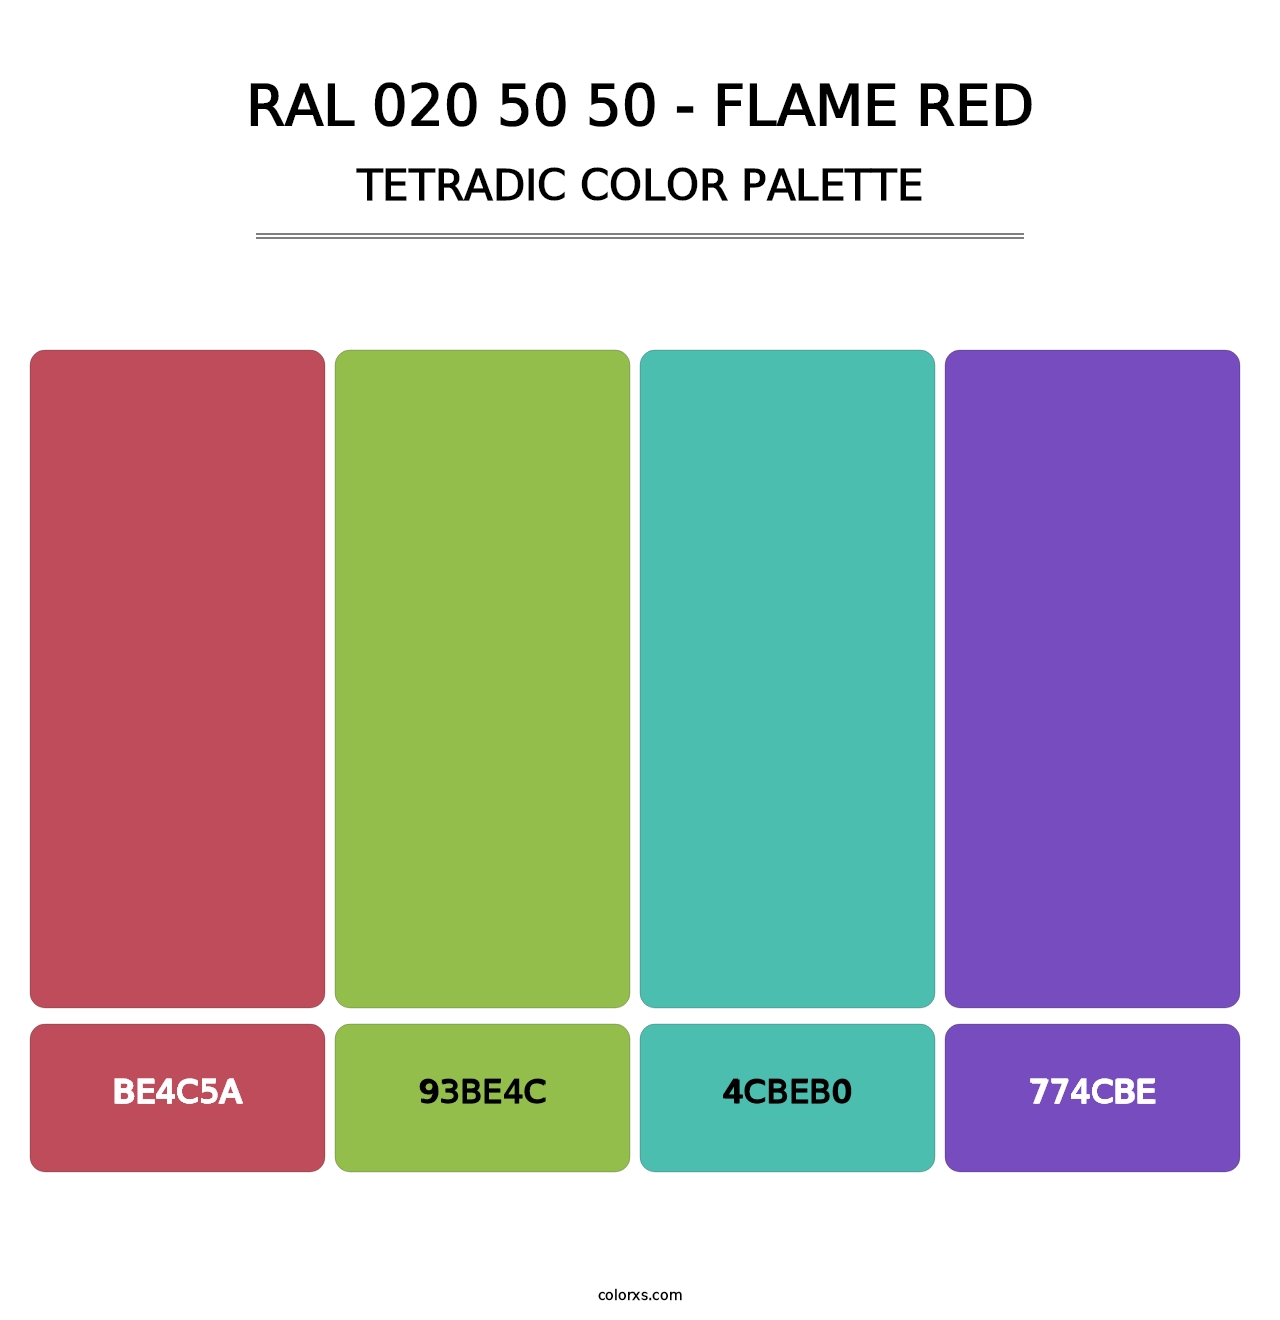 RAL 020 50 50 - Flame Red - Tetradic Color Palette